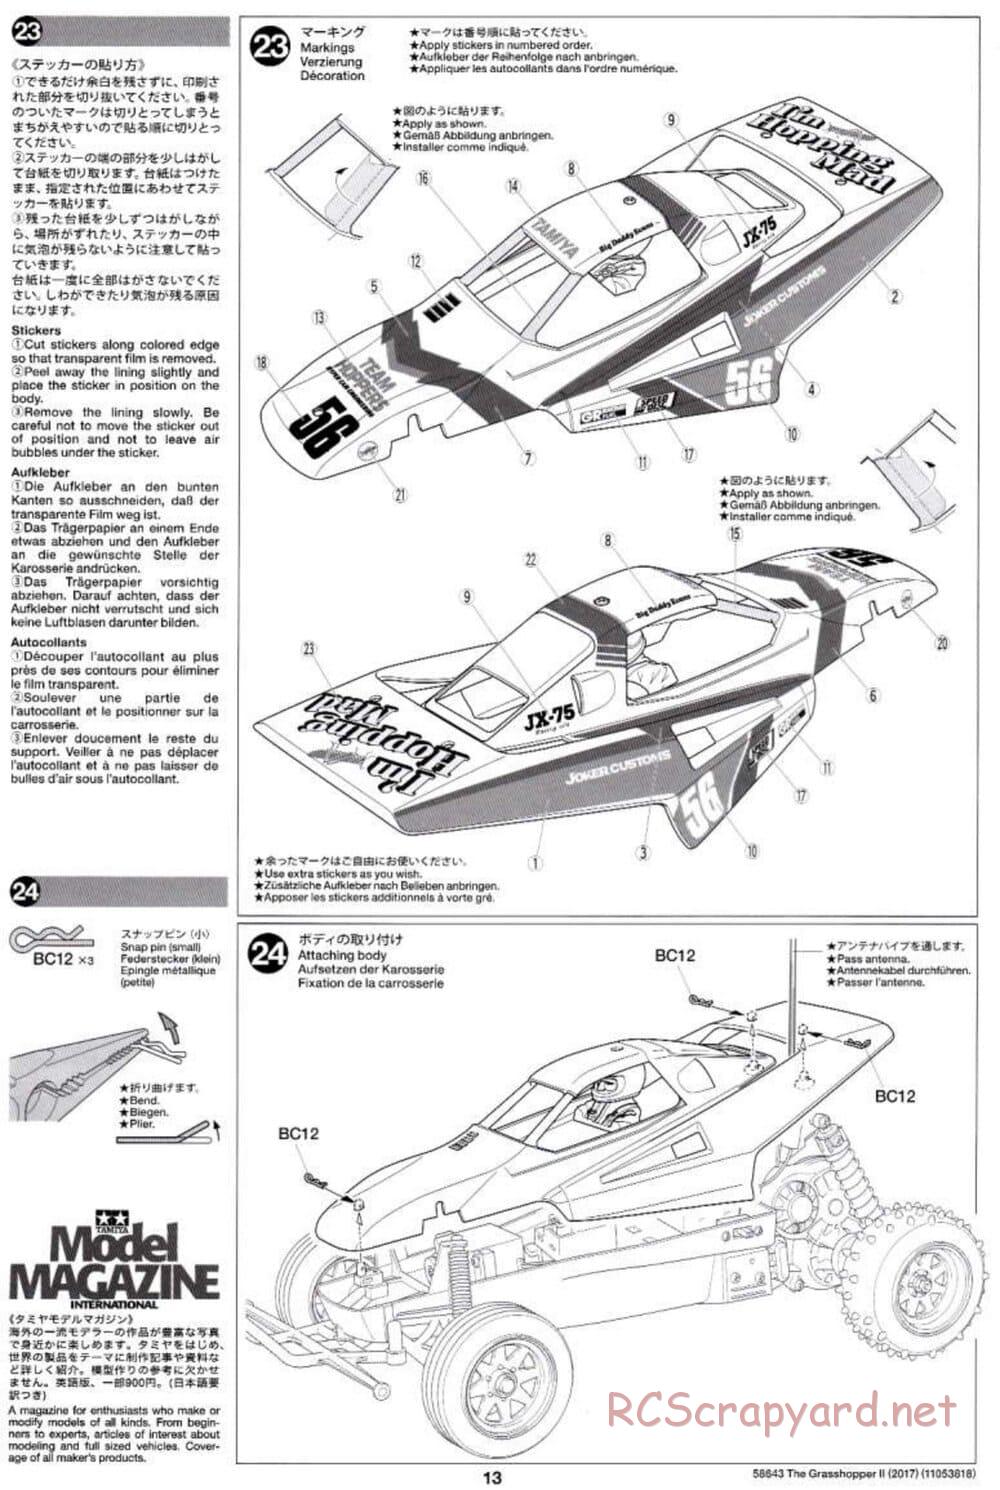 Tamiya - The Grasshopper II (2017) - GH Chassis - Manual - Page 13